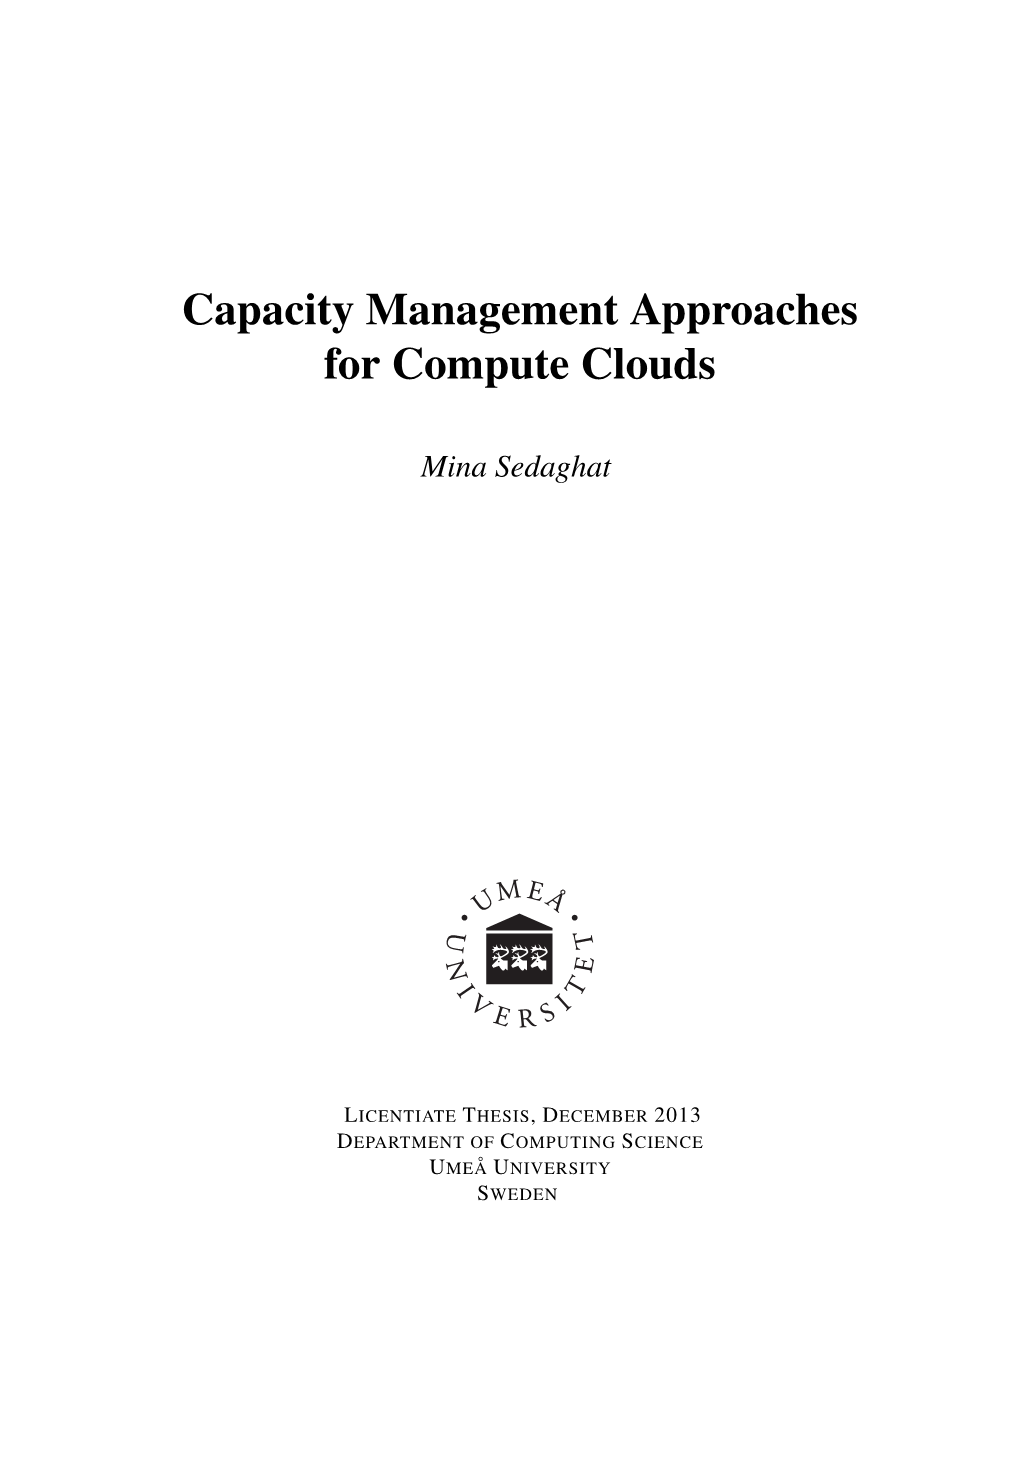 Capacity Management Approaches for Compute Clouds